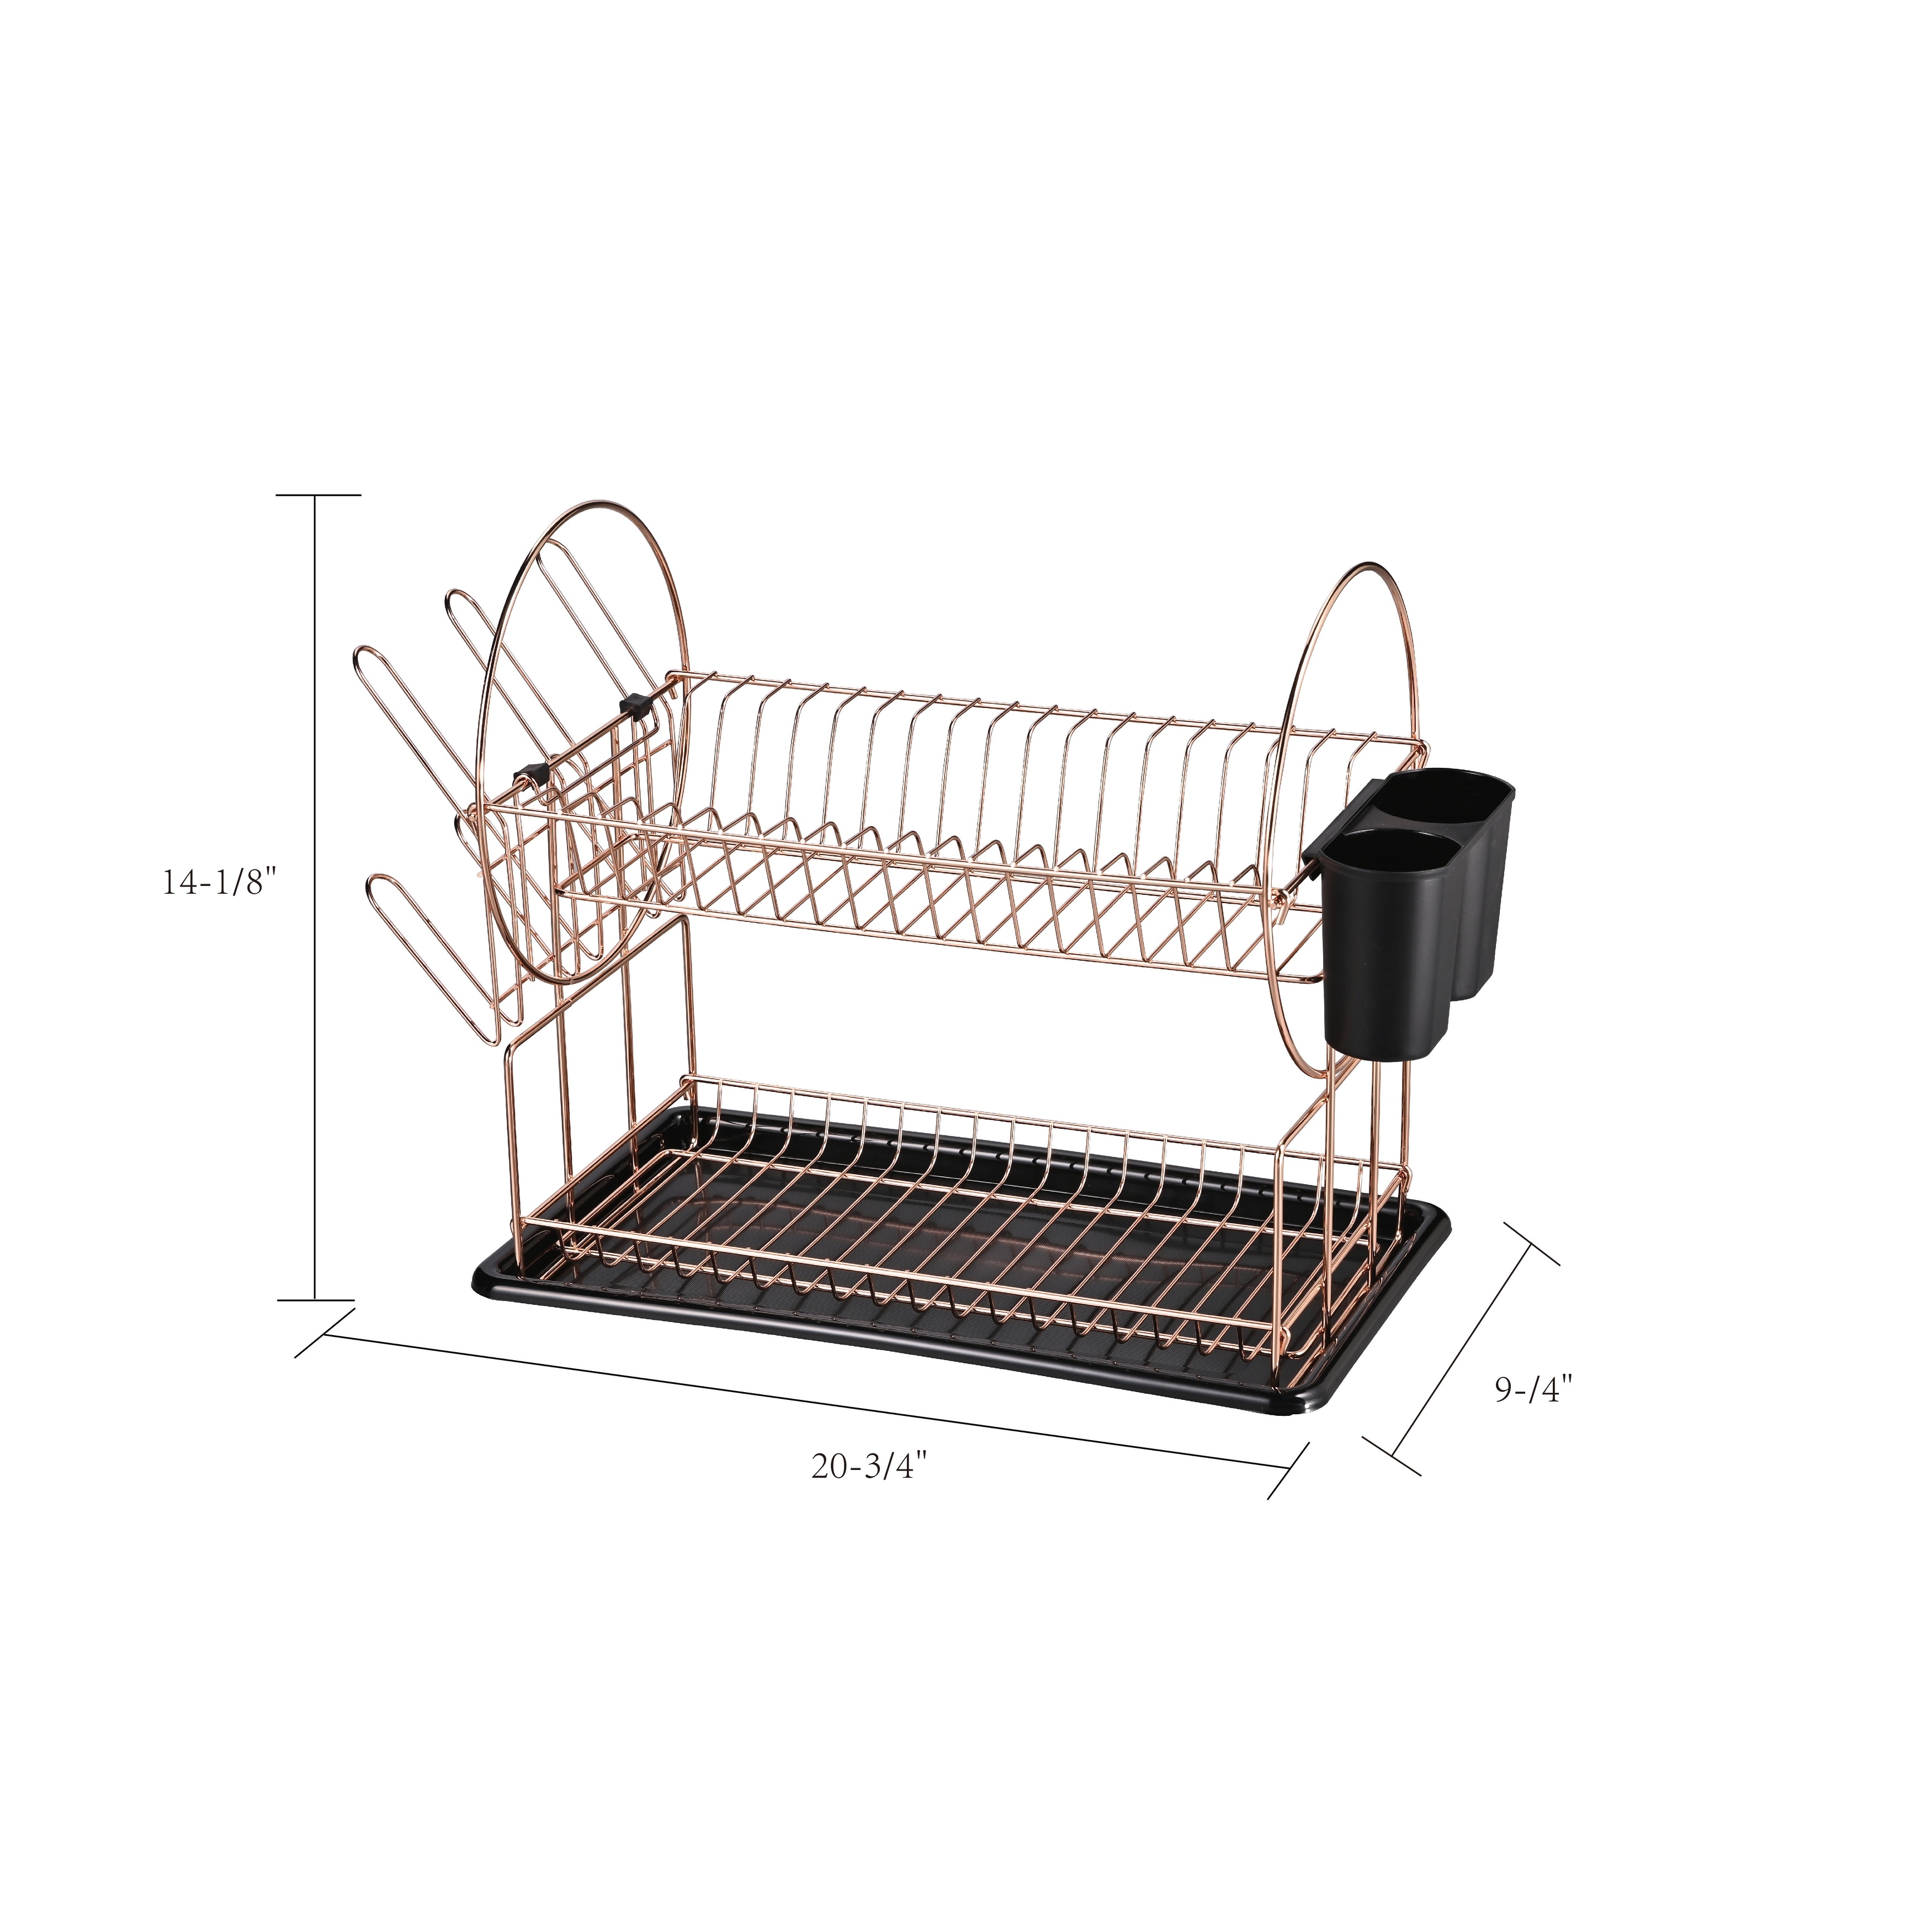 https://ak1.ostkcdn.com/images/products/is/images/direct/1711f9e7e73d048e34d3d82660bad2898be043b8/Stainless-Steel-2-Tier-dish-rack-with-dripping-tray.jpg